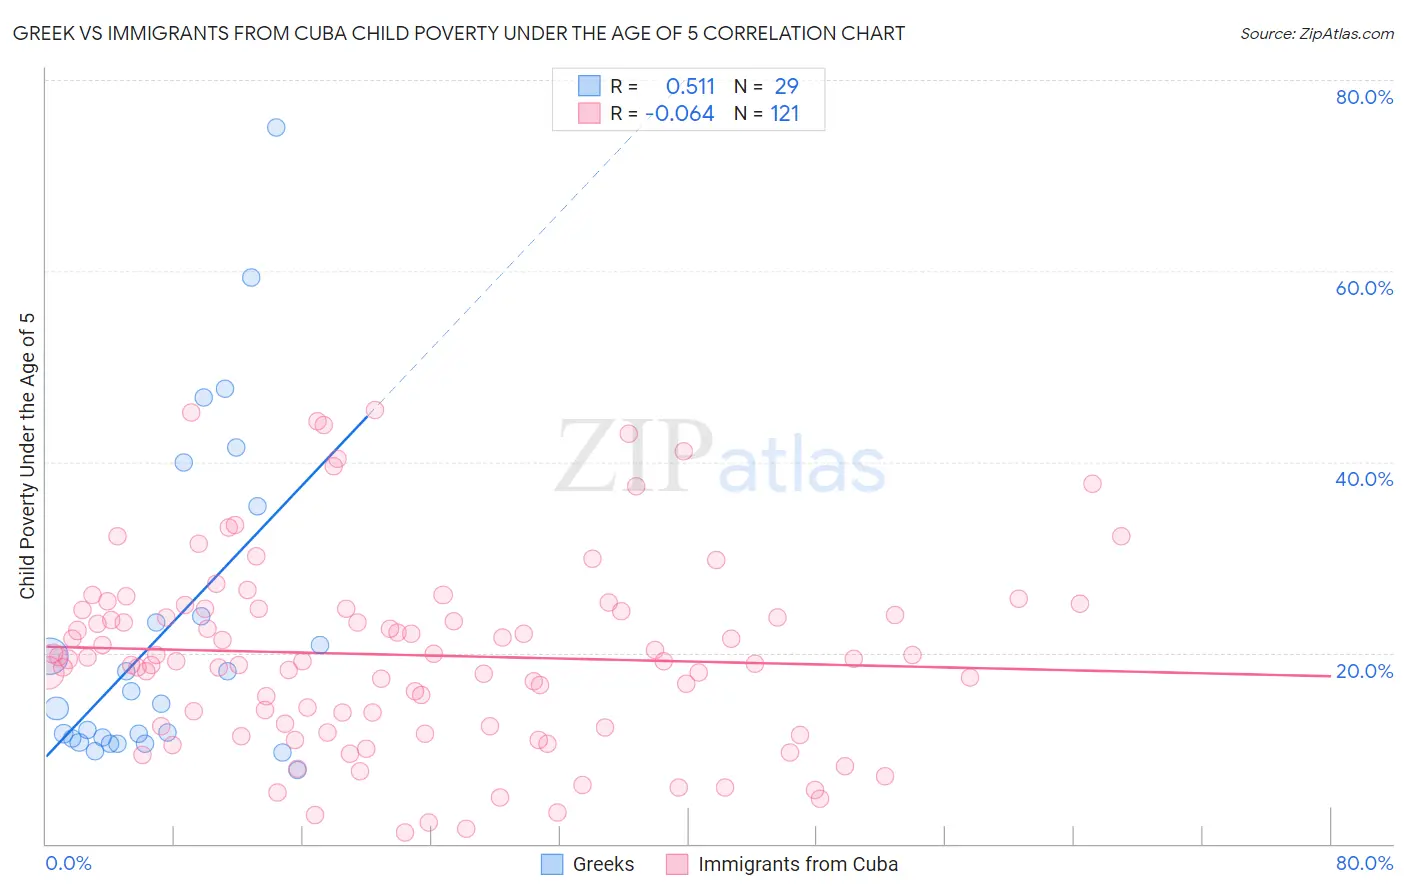 Greek vs Immigrants from Cuba Child Poverty Under the Age of 5